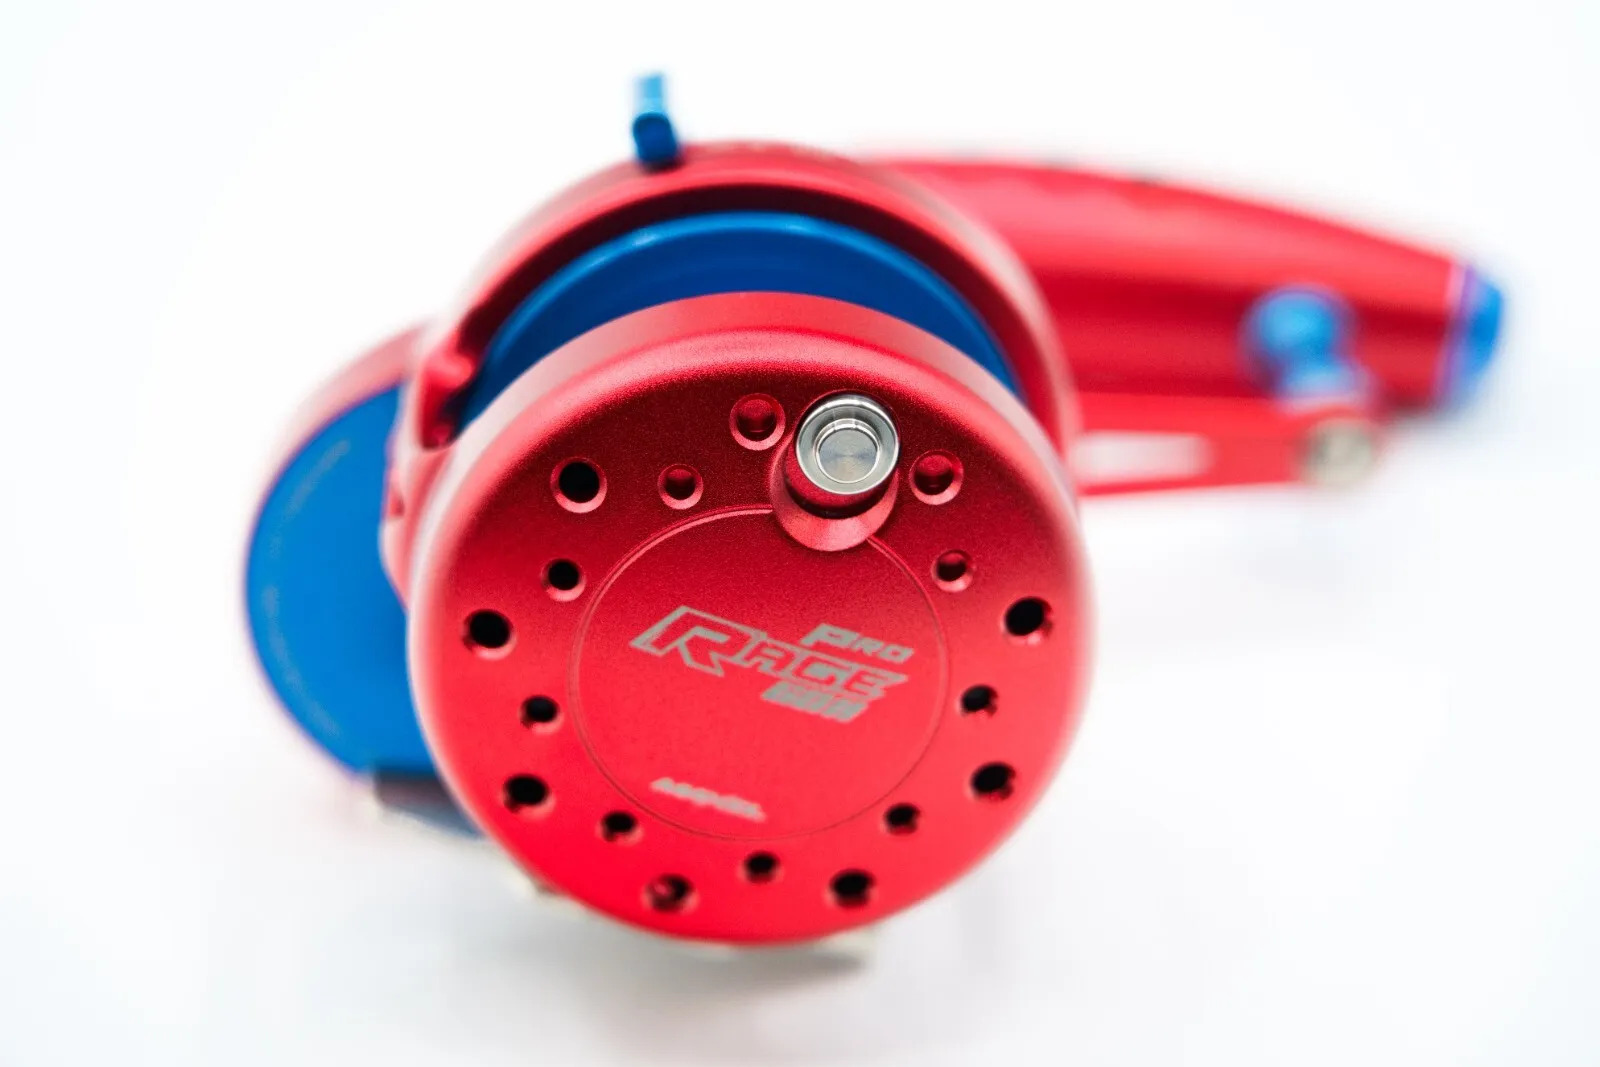 Maxel Jigging Reel Rage Pro 60 Lever Drag Conventional Reel Red/Blue